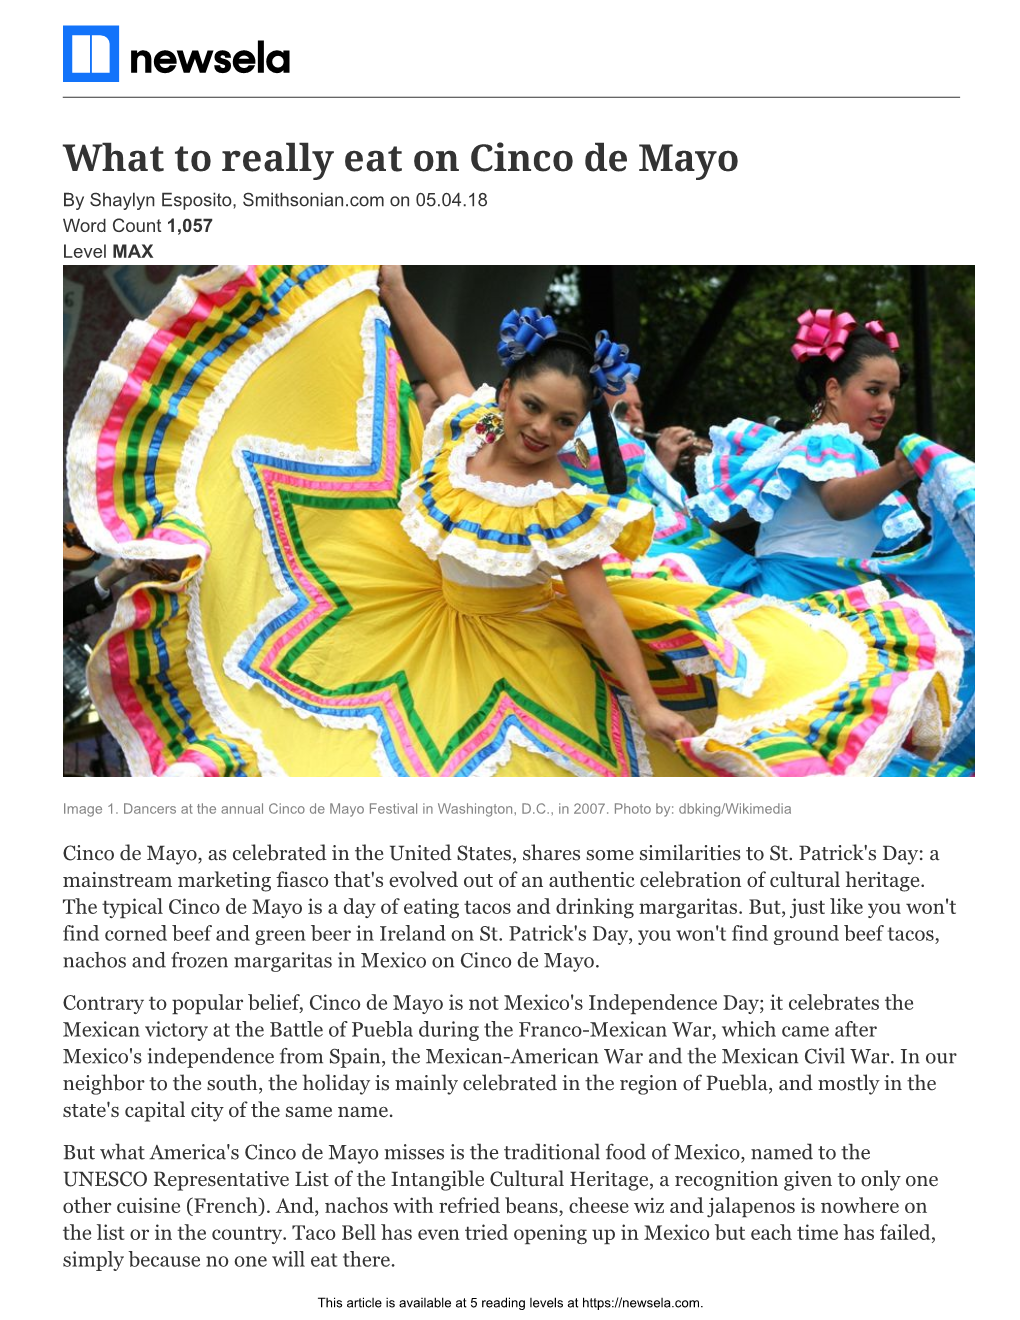 What to Really Eat on Cinco De Mayo by Shaylyn Esposito, Smithsonian.Com on 05.04.18 Word Count 1,057 Level MAX